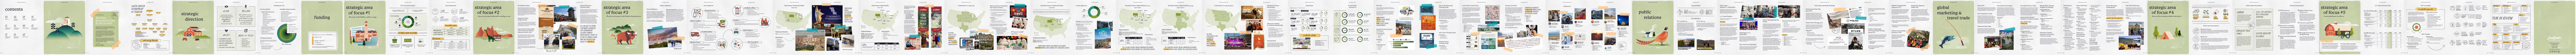 SD Dept. Of Tourism Annual Report